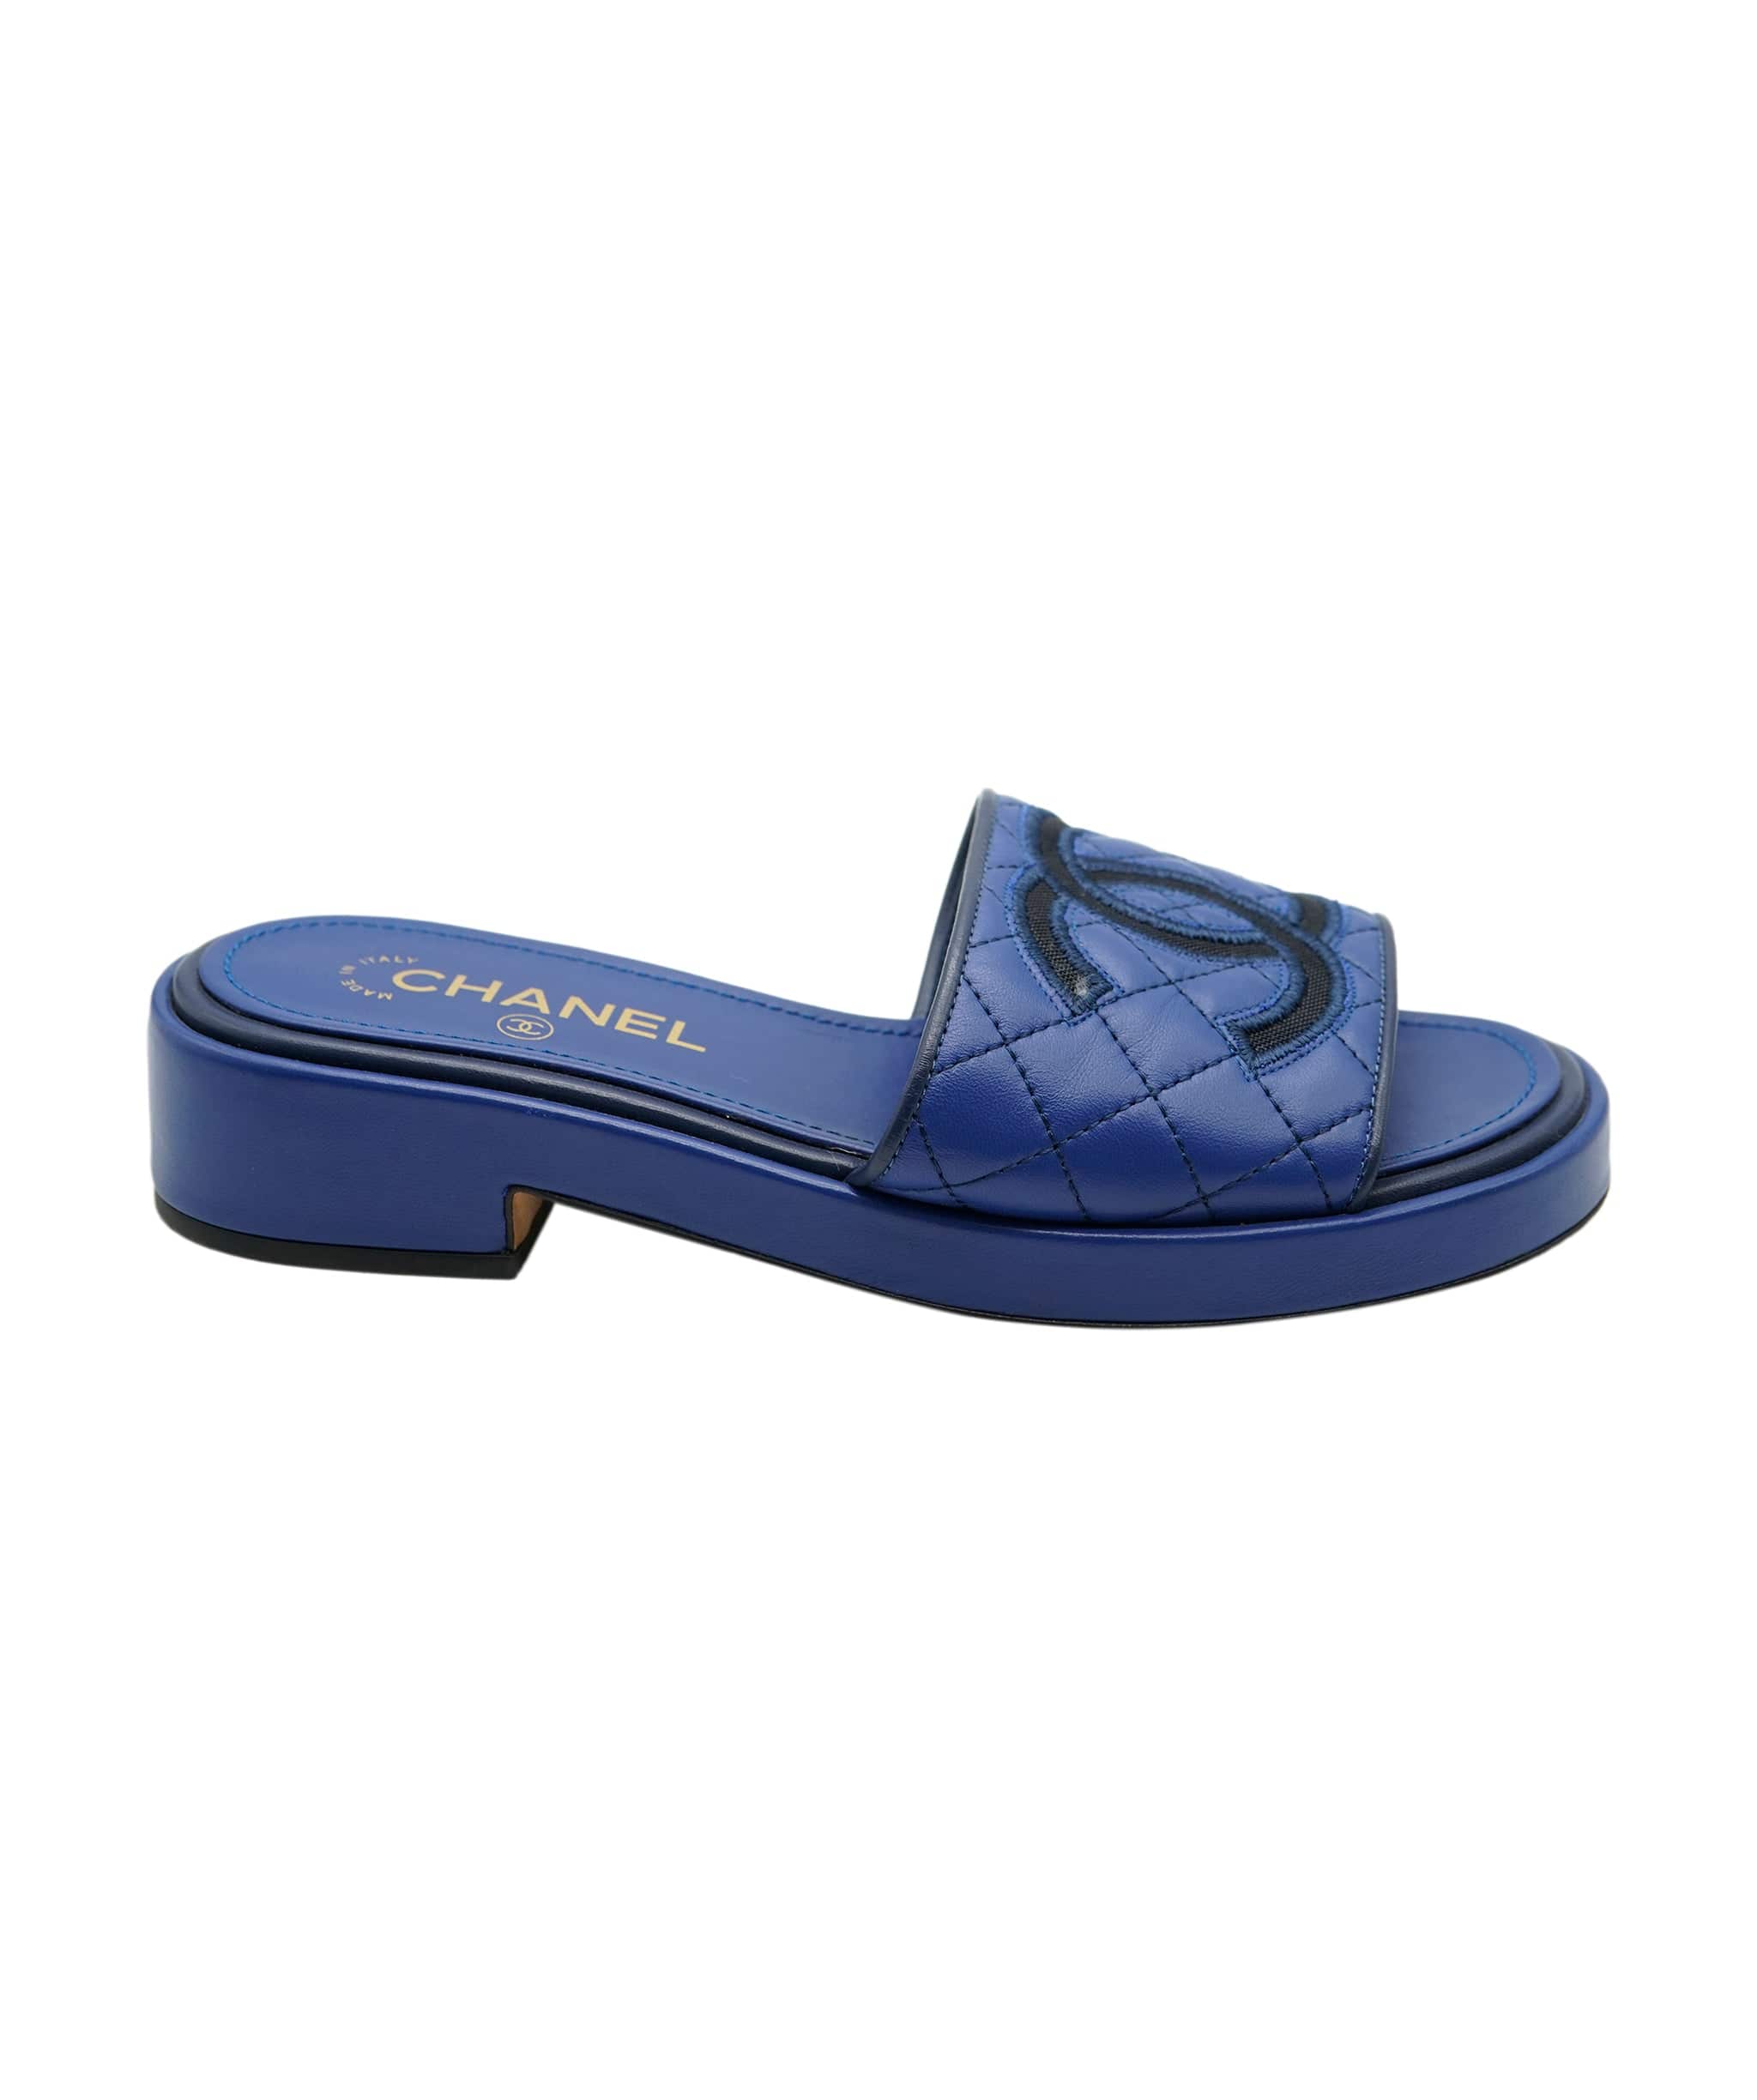 Chanel Chanel blue sliders with dustbags size 38 - AJC0505